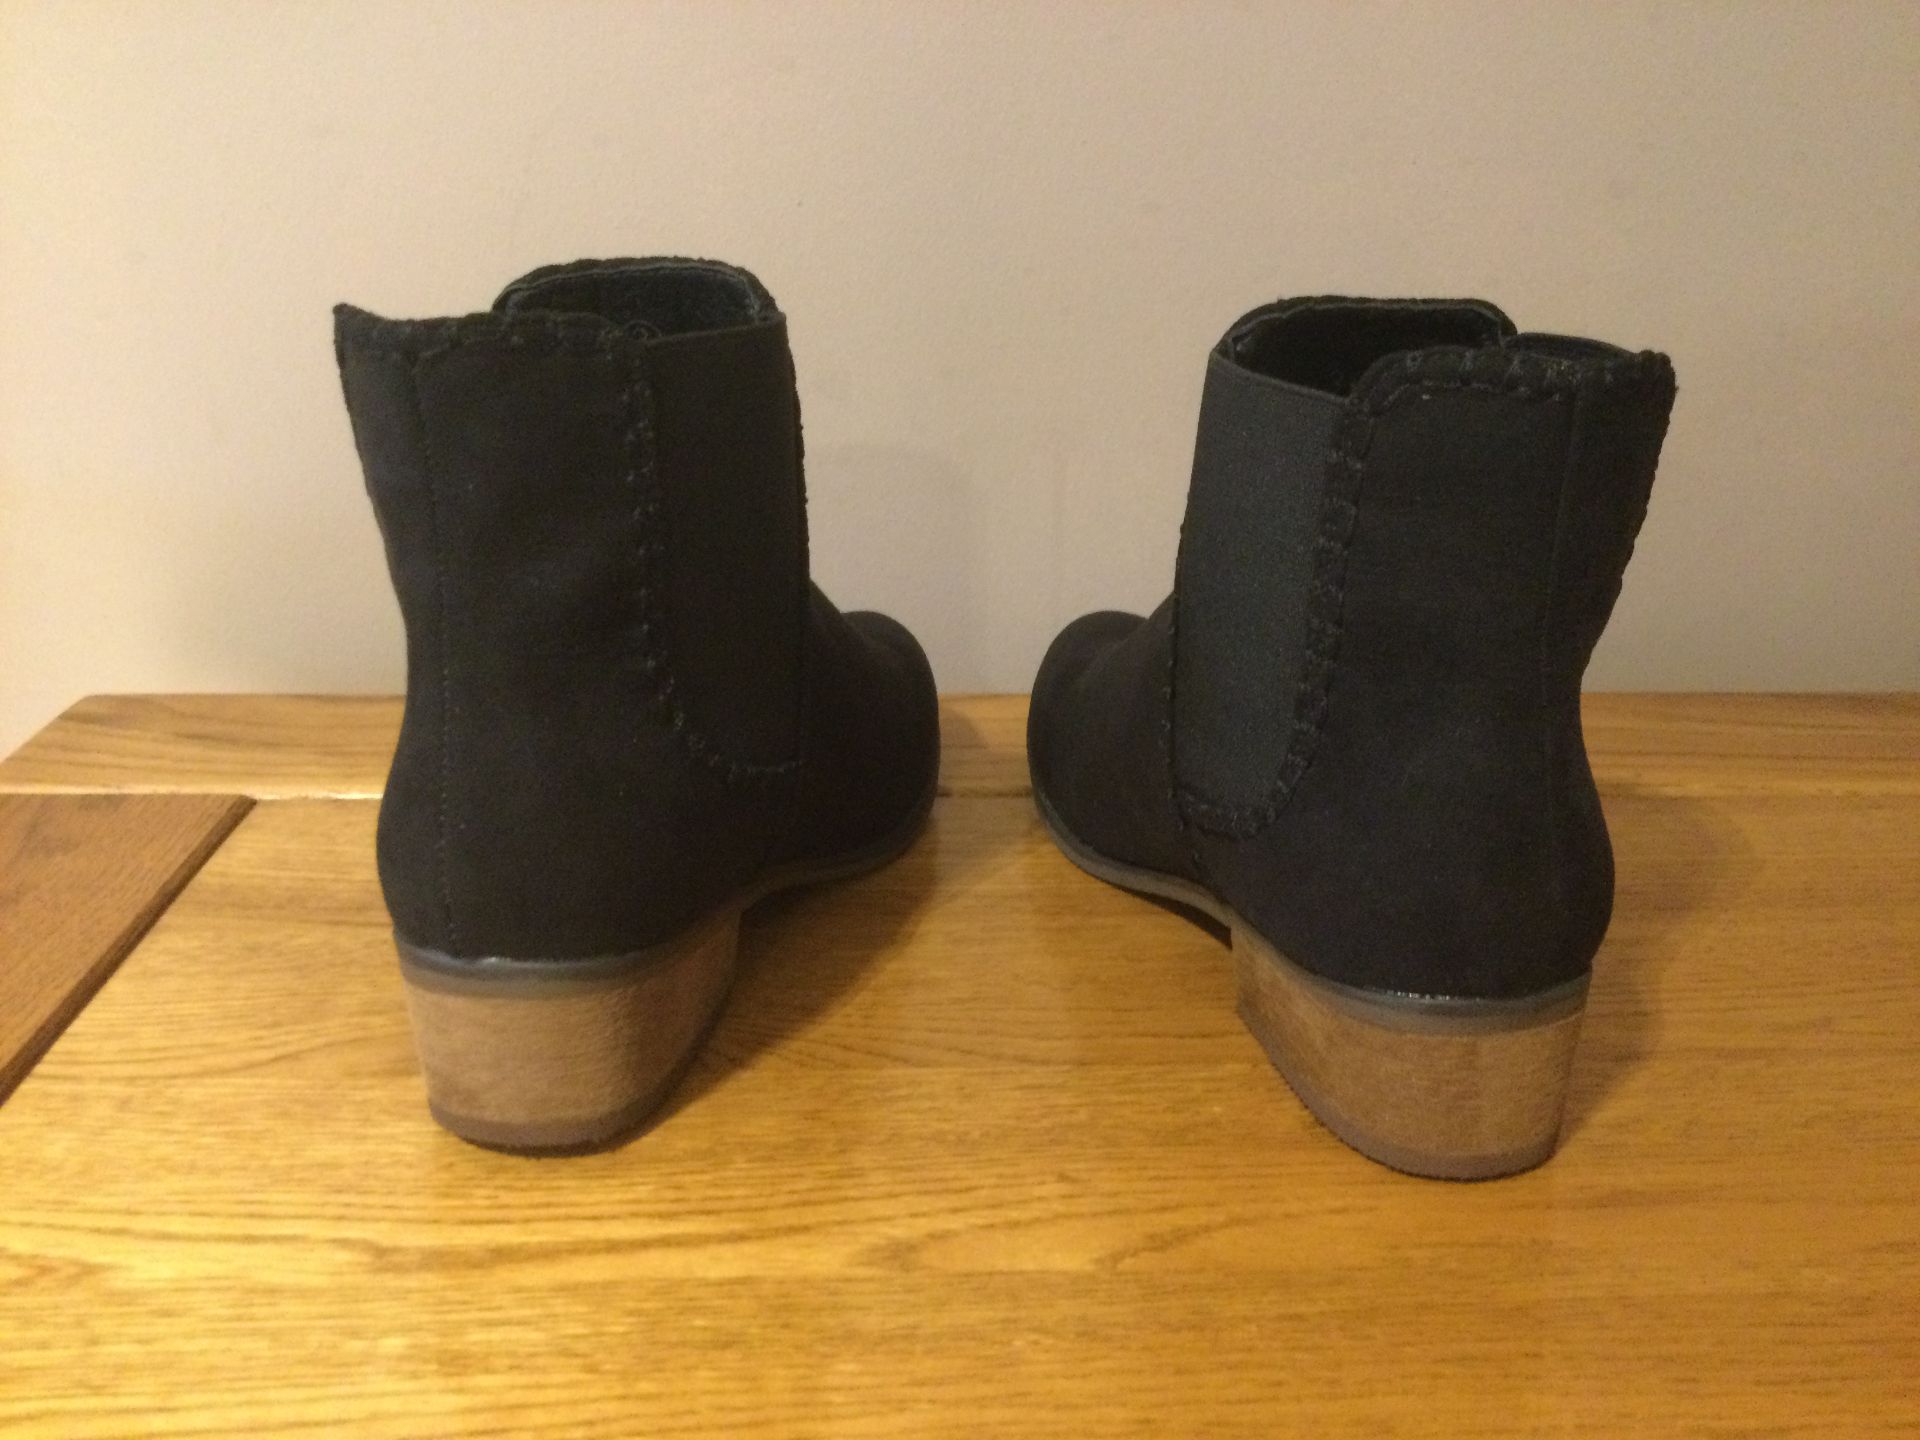 Dolcis “Pasha” Low Heel Ankle Boots, Size 3, Black - New RRP £45.99 - Image 3 of 6